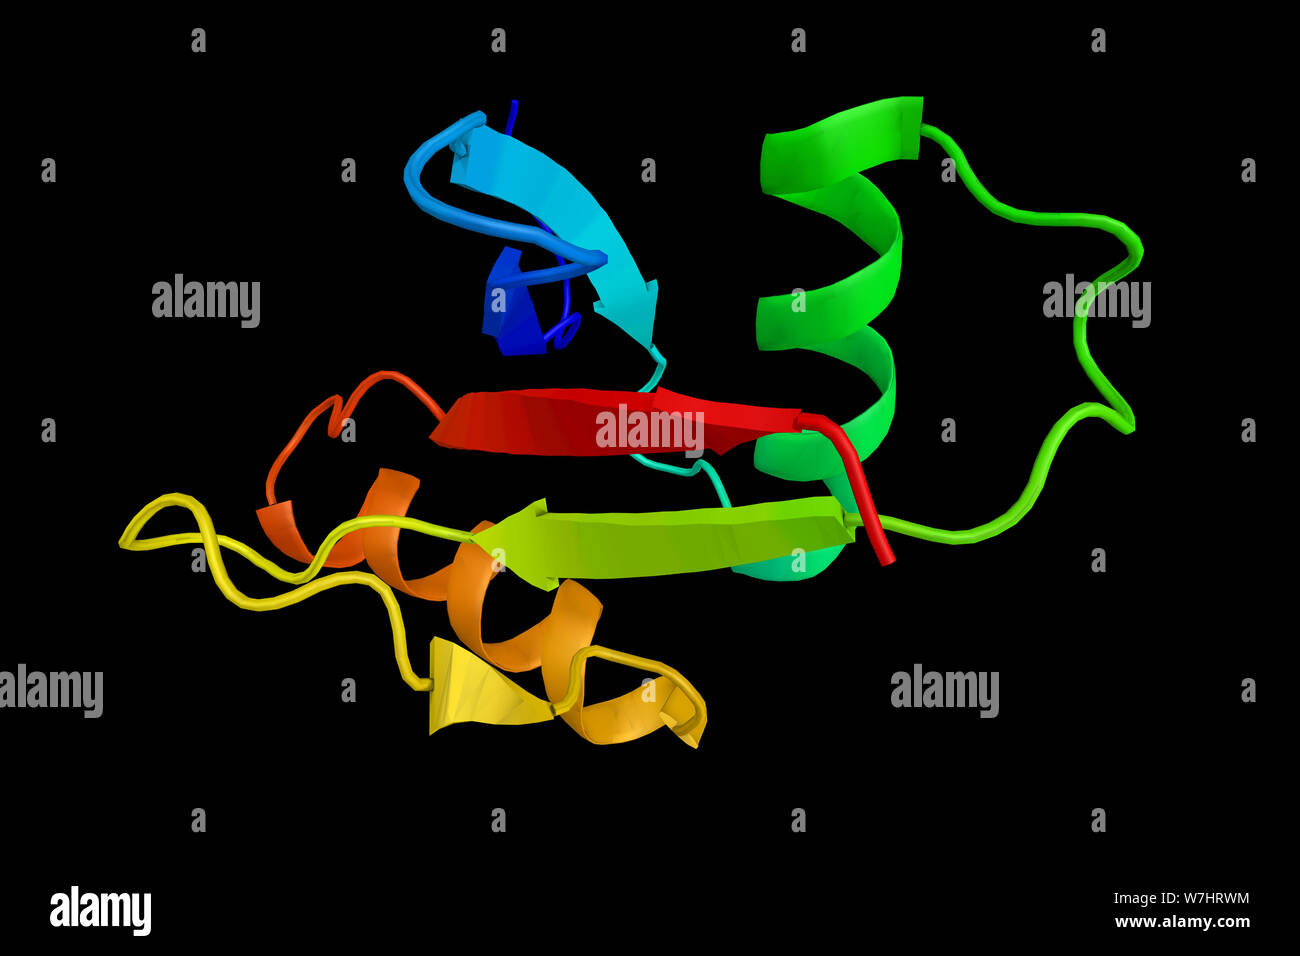 Protein kinase C iota type, an enzyme involved in a wide variety of cellular processes. 3d rendering. Stock Photo